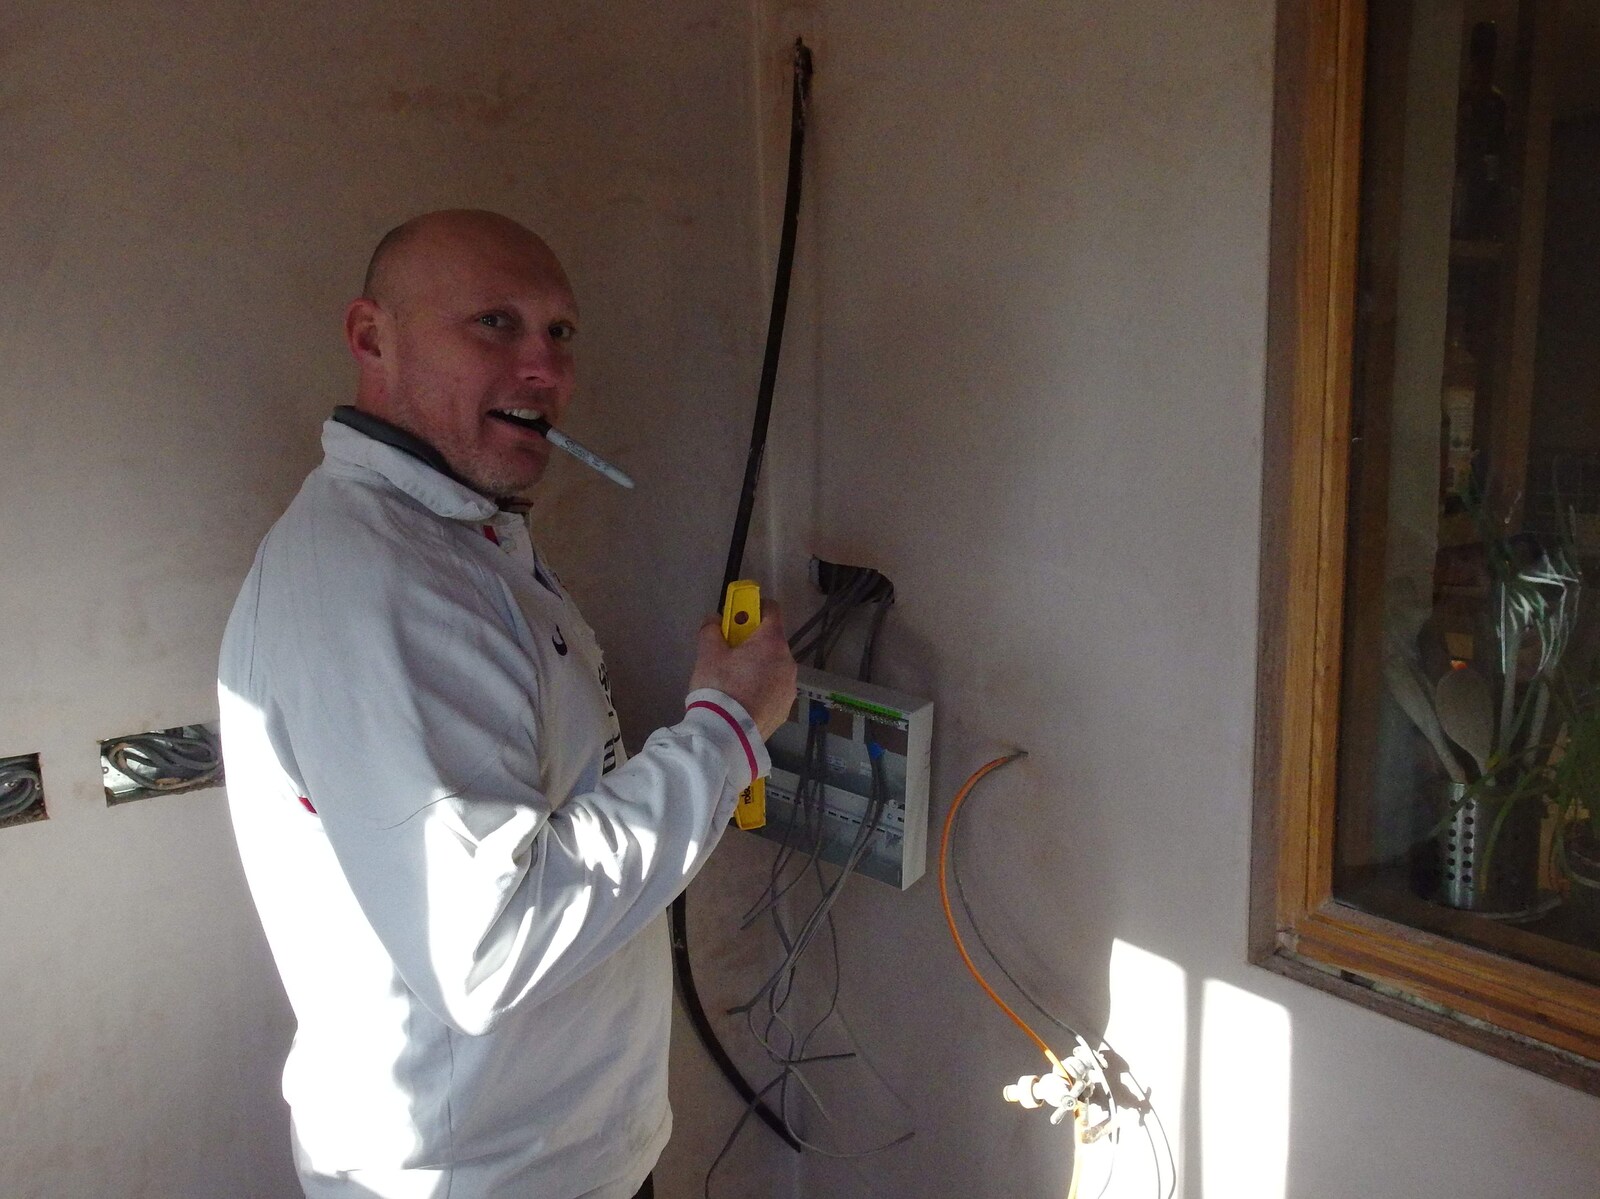 Gov installs a new Consumer Unit from Building Progress: Electrical Second Fixing, Brome, Suffolk - 4th March 2014